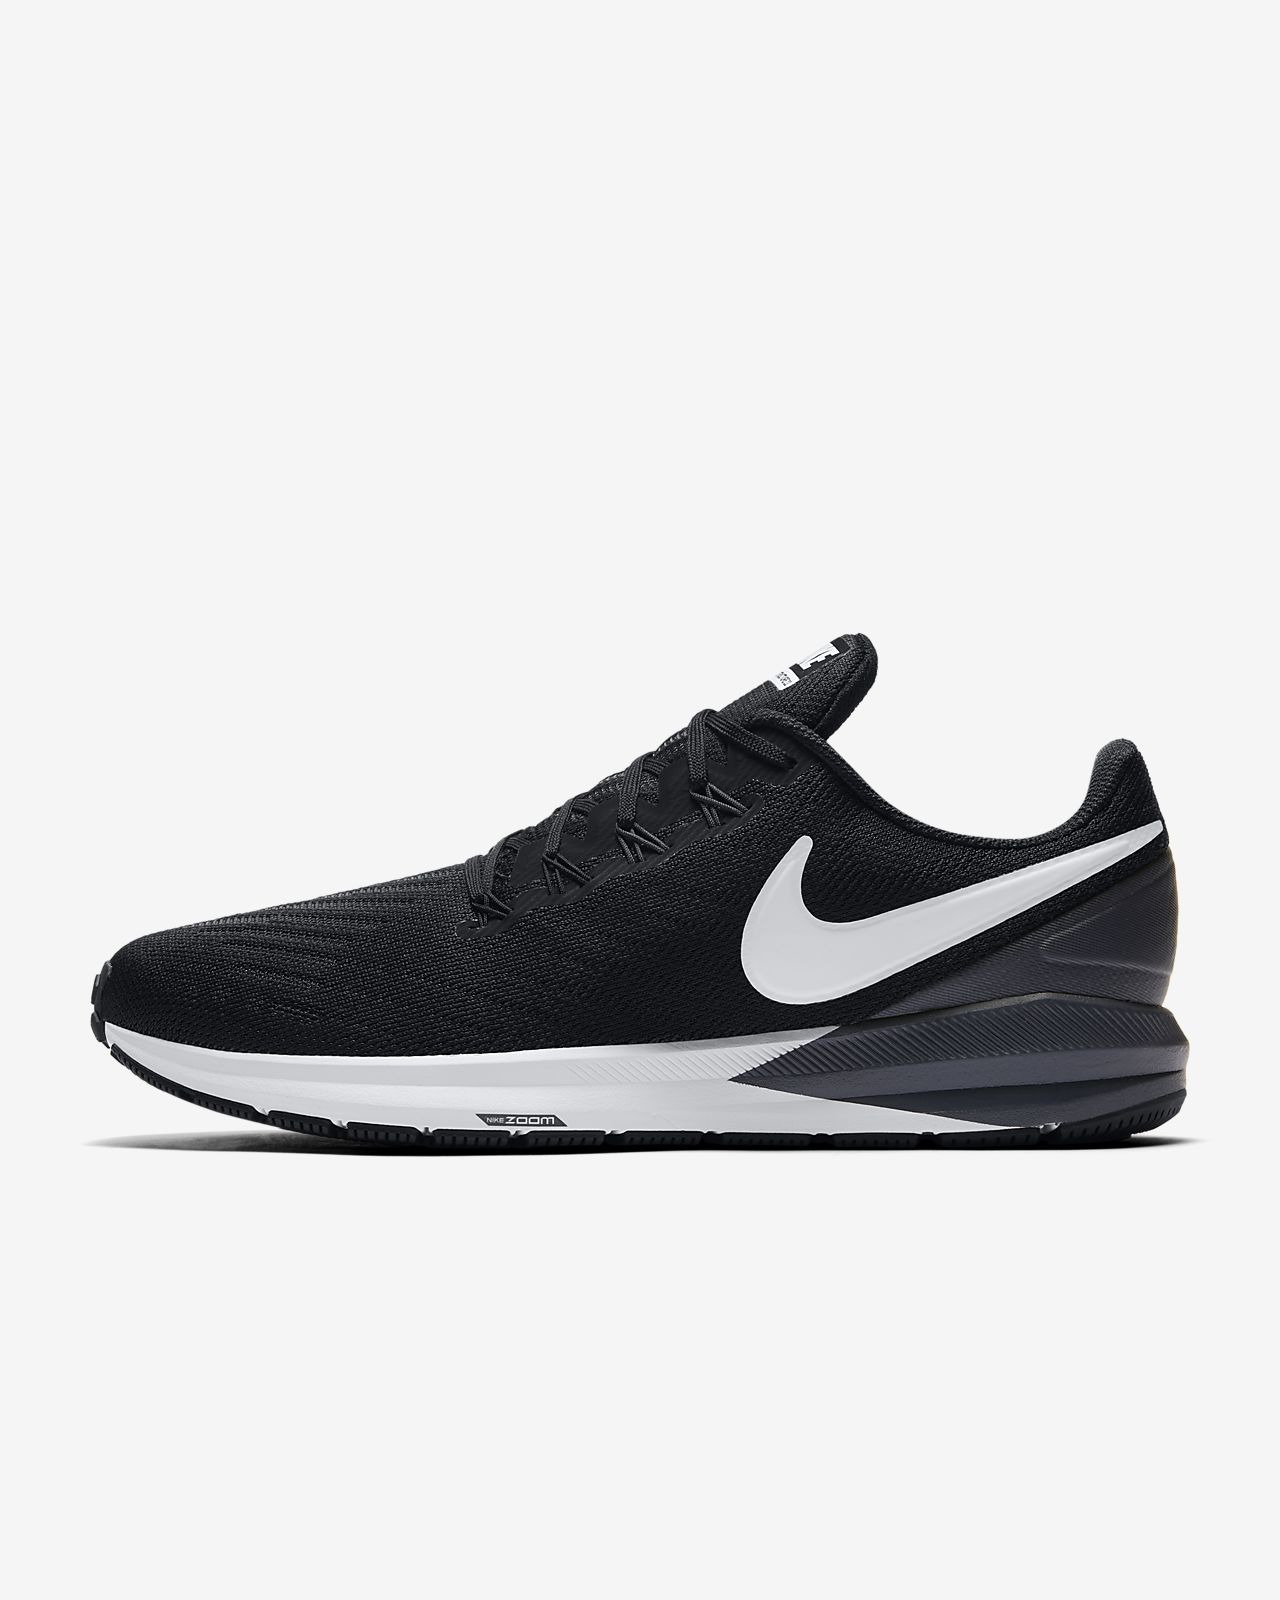 Nike Air Zoom Structure 22 Men's Running Shoe